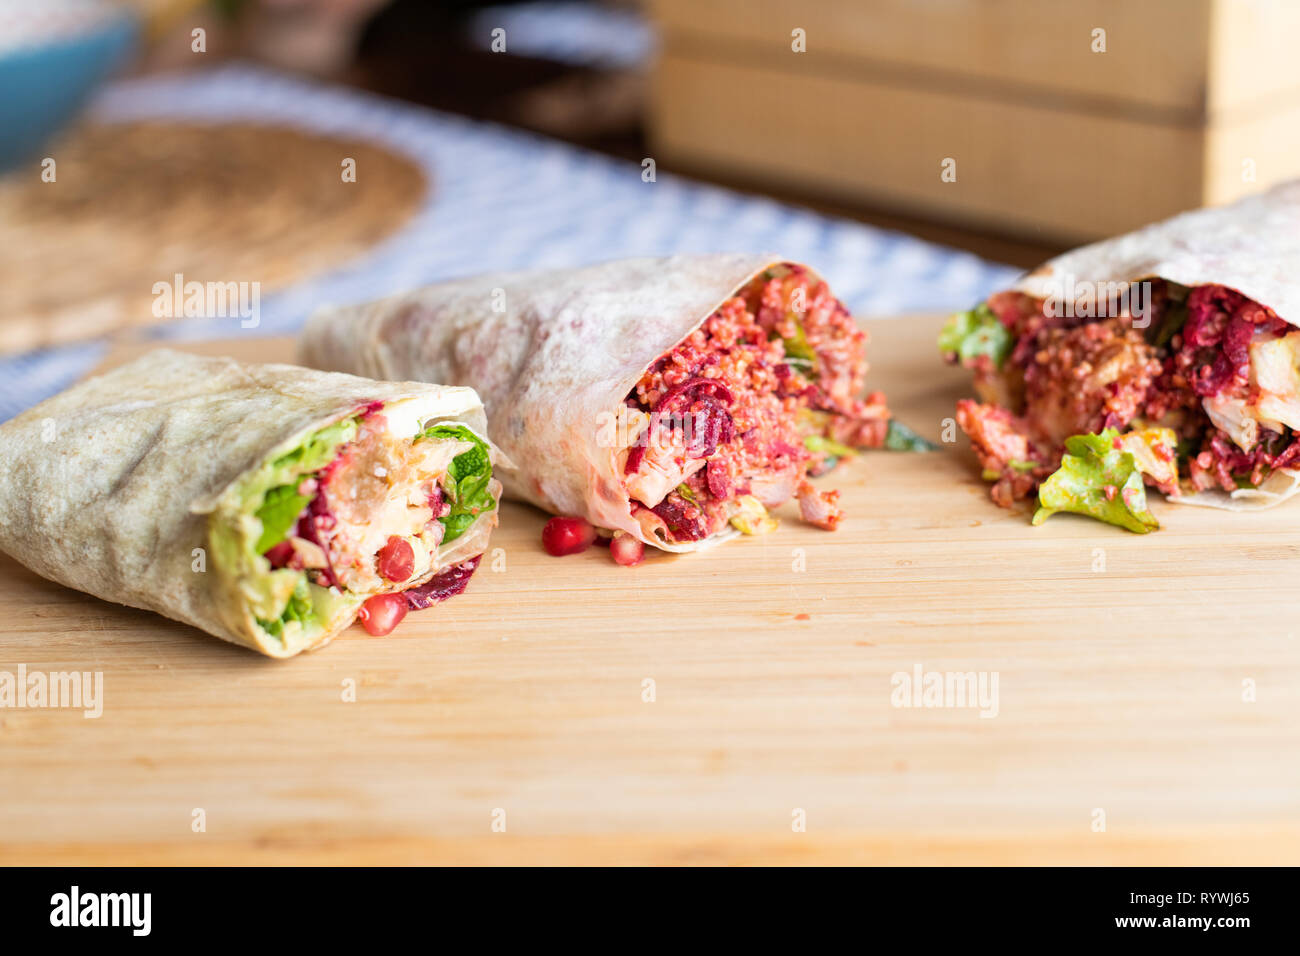 Organic Healthy Wraps with salad, quinoa, grilled chicken, red ...